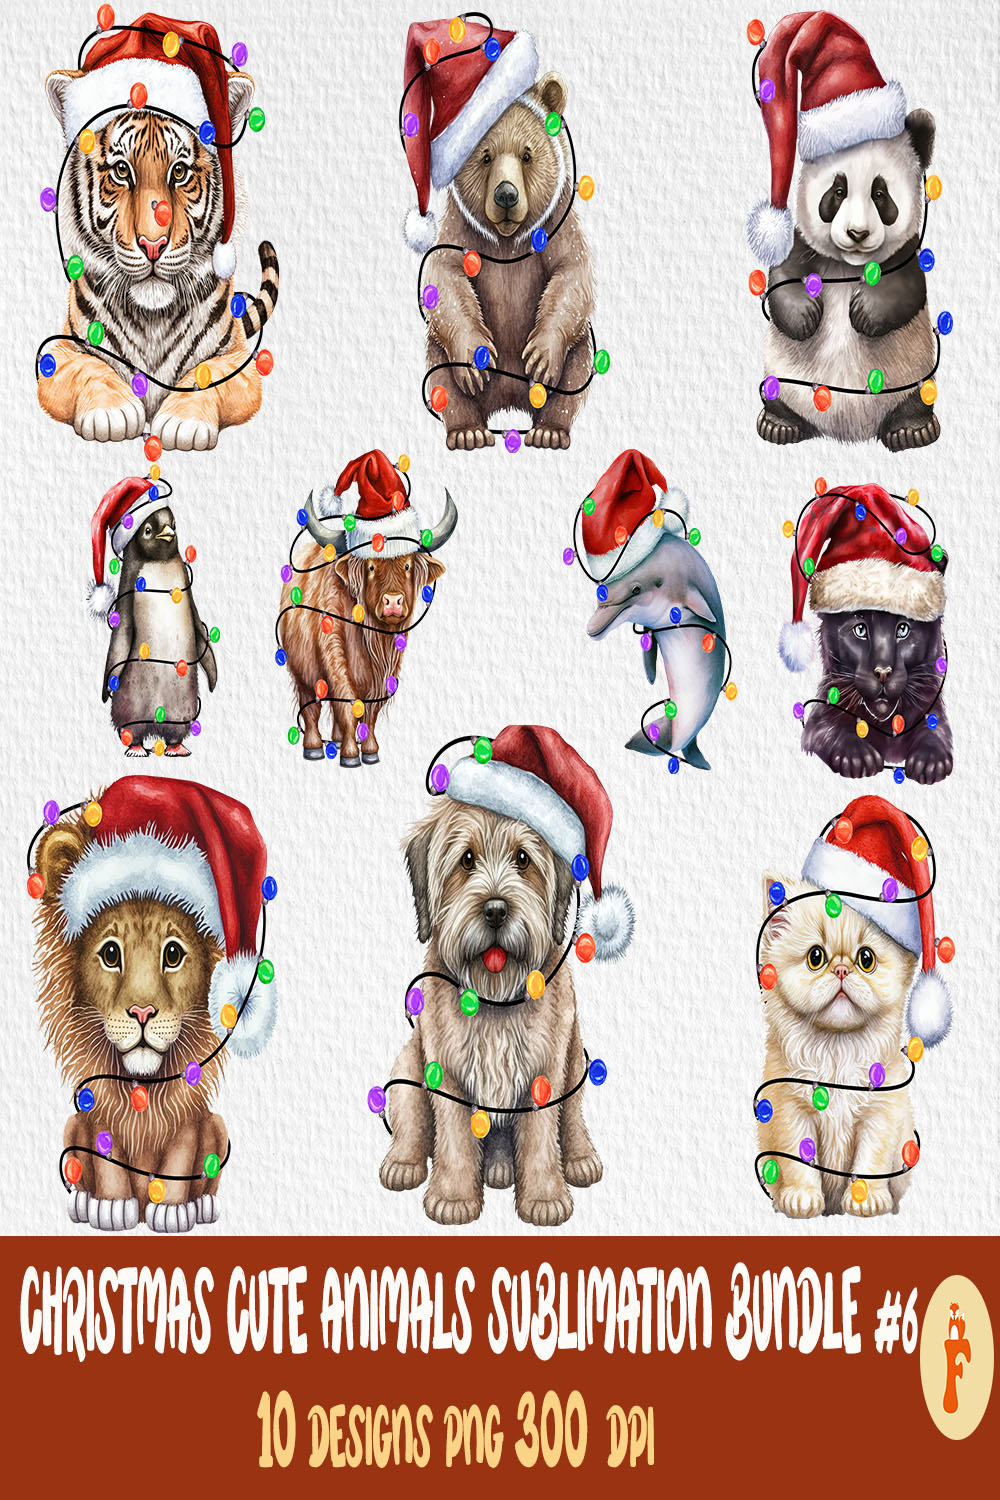 Collection of amazing images of animals in Christmas clothes.